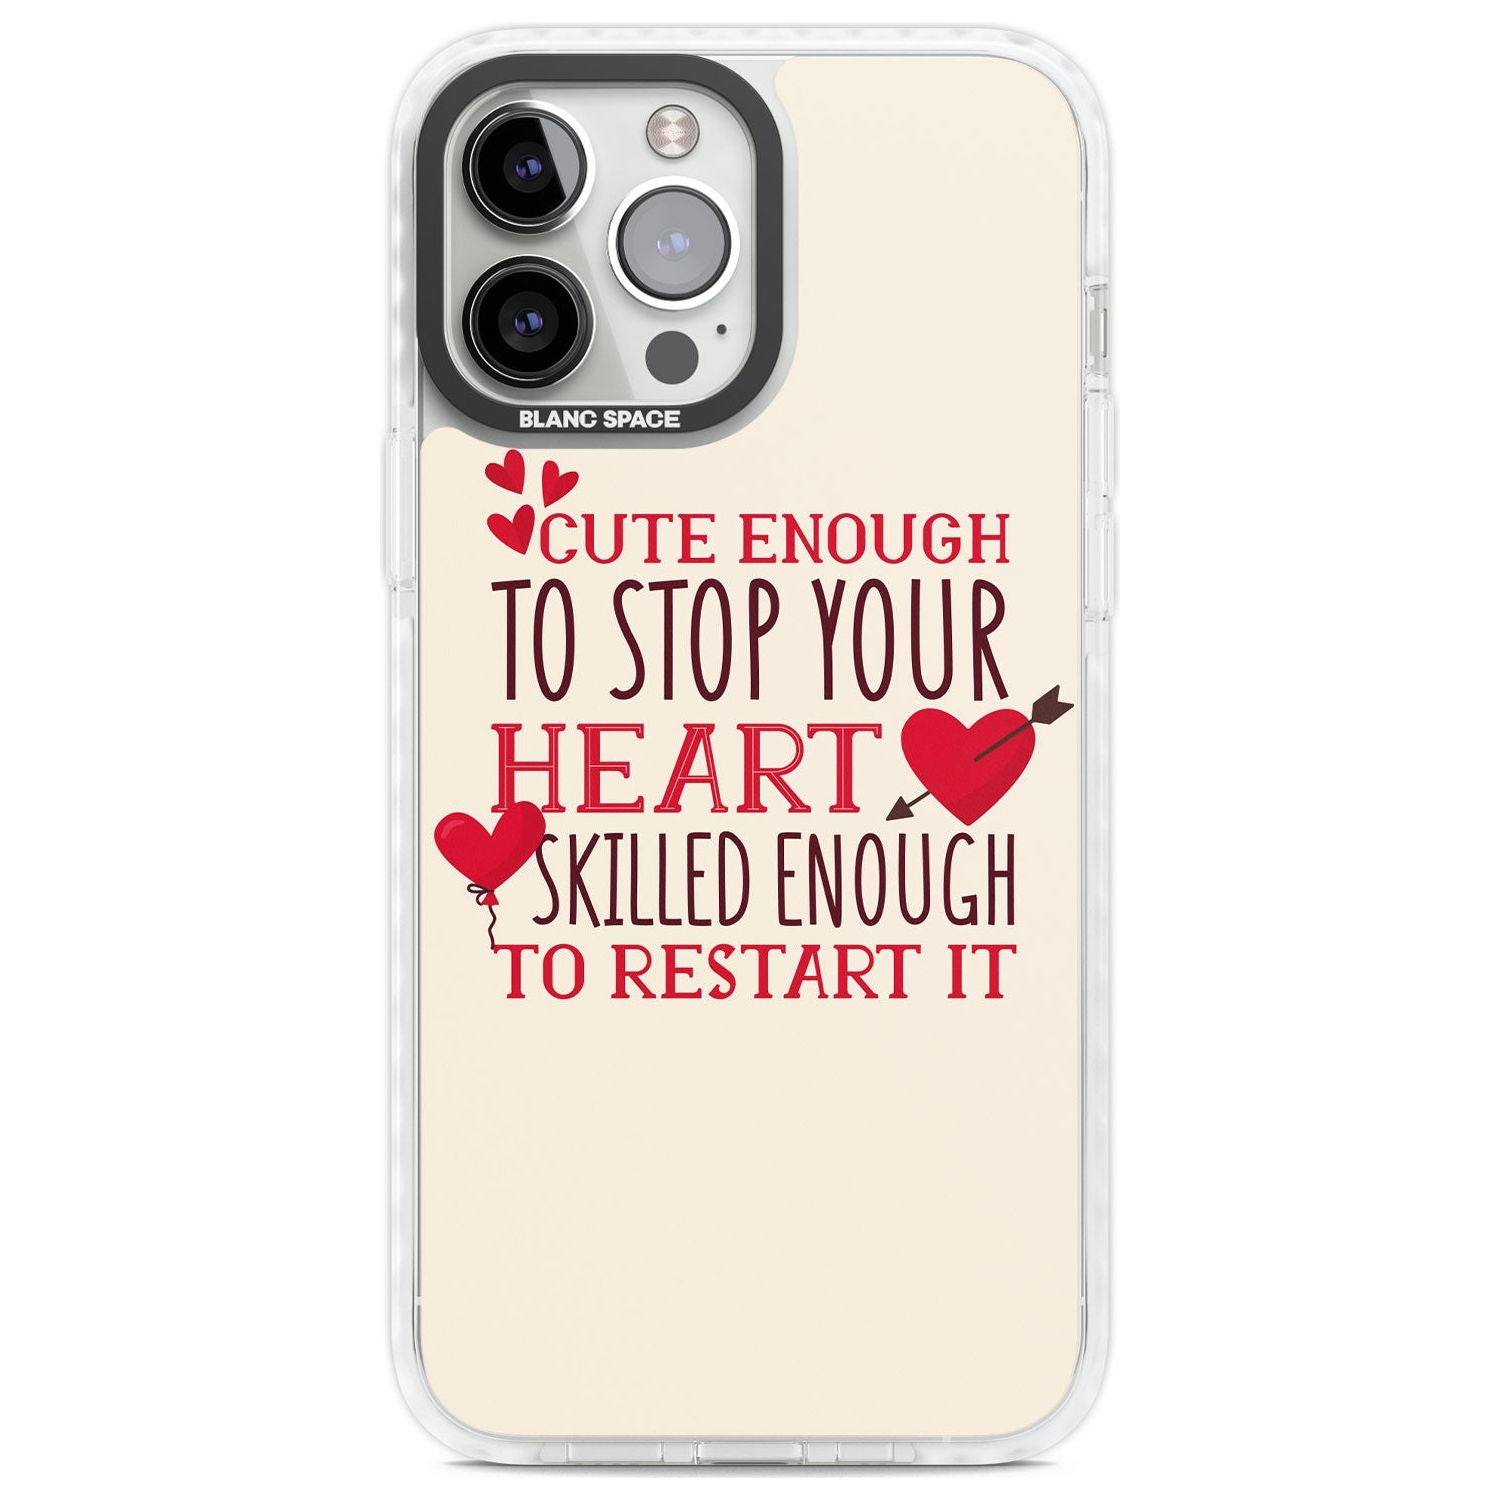 Medical Design Cute Enough to Stop Your Heart Phone Case iPhone 13 Pro Max / Impact Case,iPhone 14 Pro Max / Impact Case Blanc Space